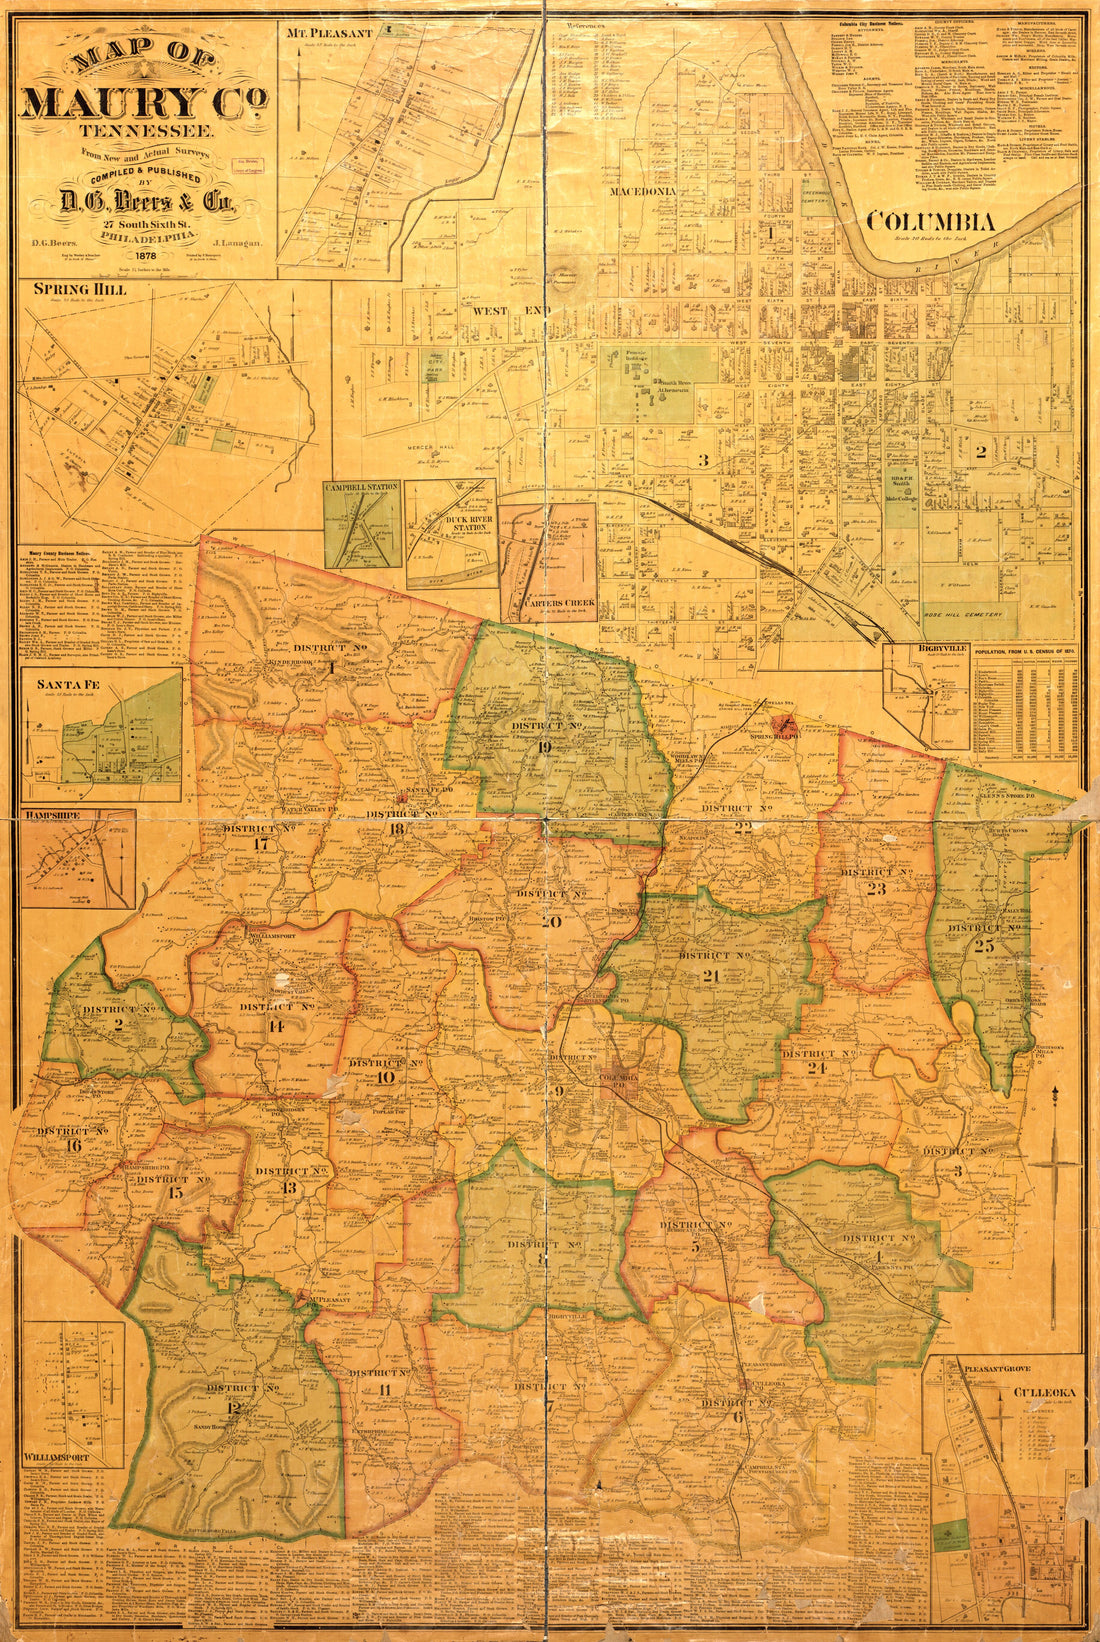 This old map of Map of Maury Co., Tennessee : from New and Actual Surveys (Map of Maury County, Tennessee) from 1878 was created by  D.G. Beers &amp; Co,  F. Bourquin &amp; Co,  Worley &amp; Bracher in 1878